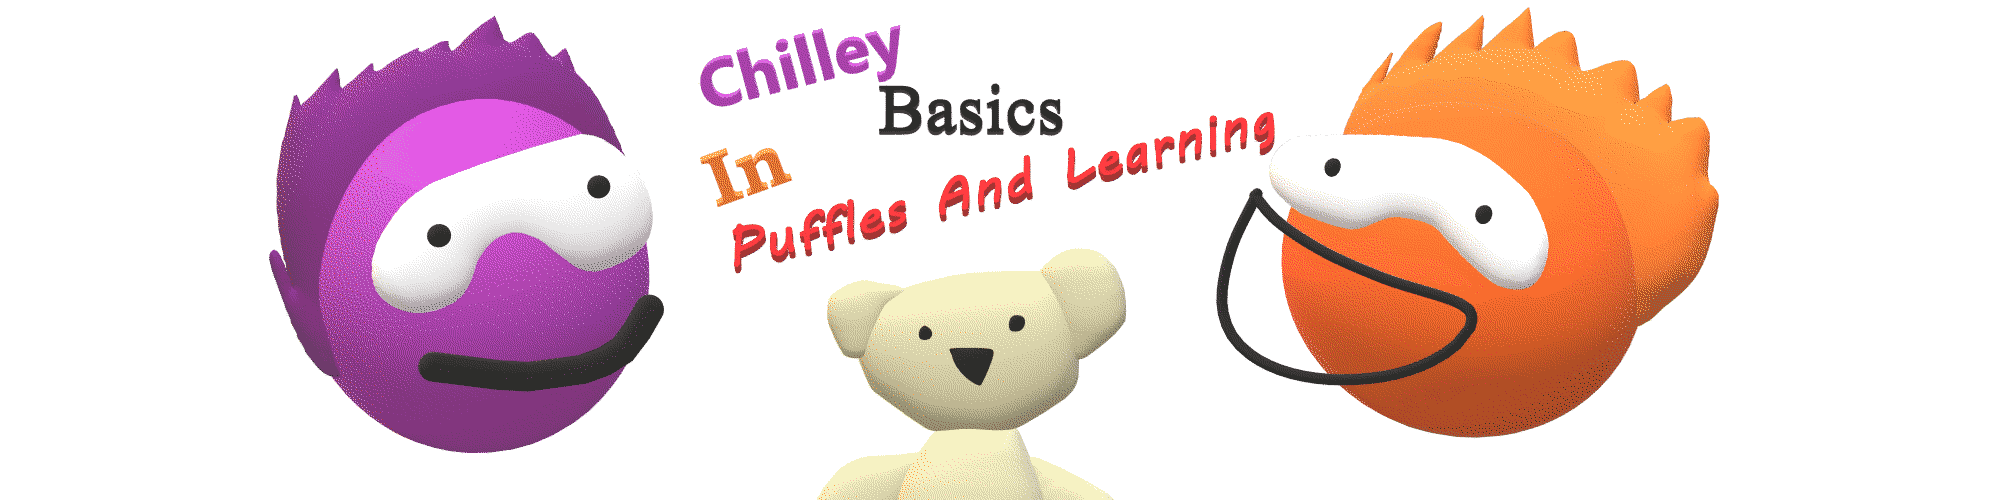 Chilley's Basics In Puffles And Learning